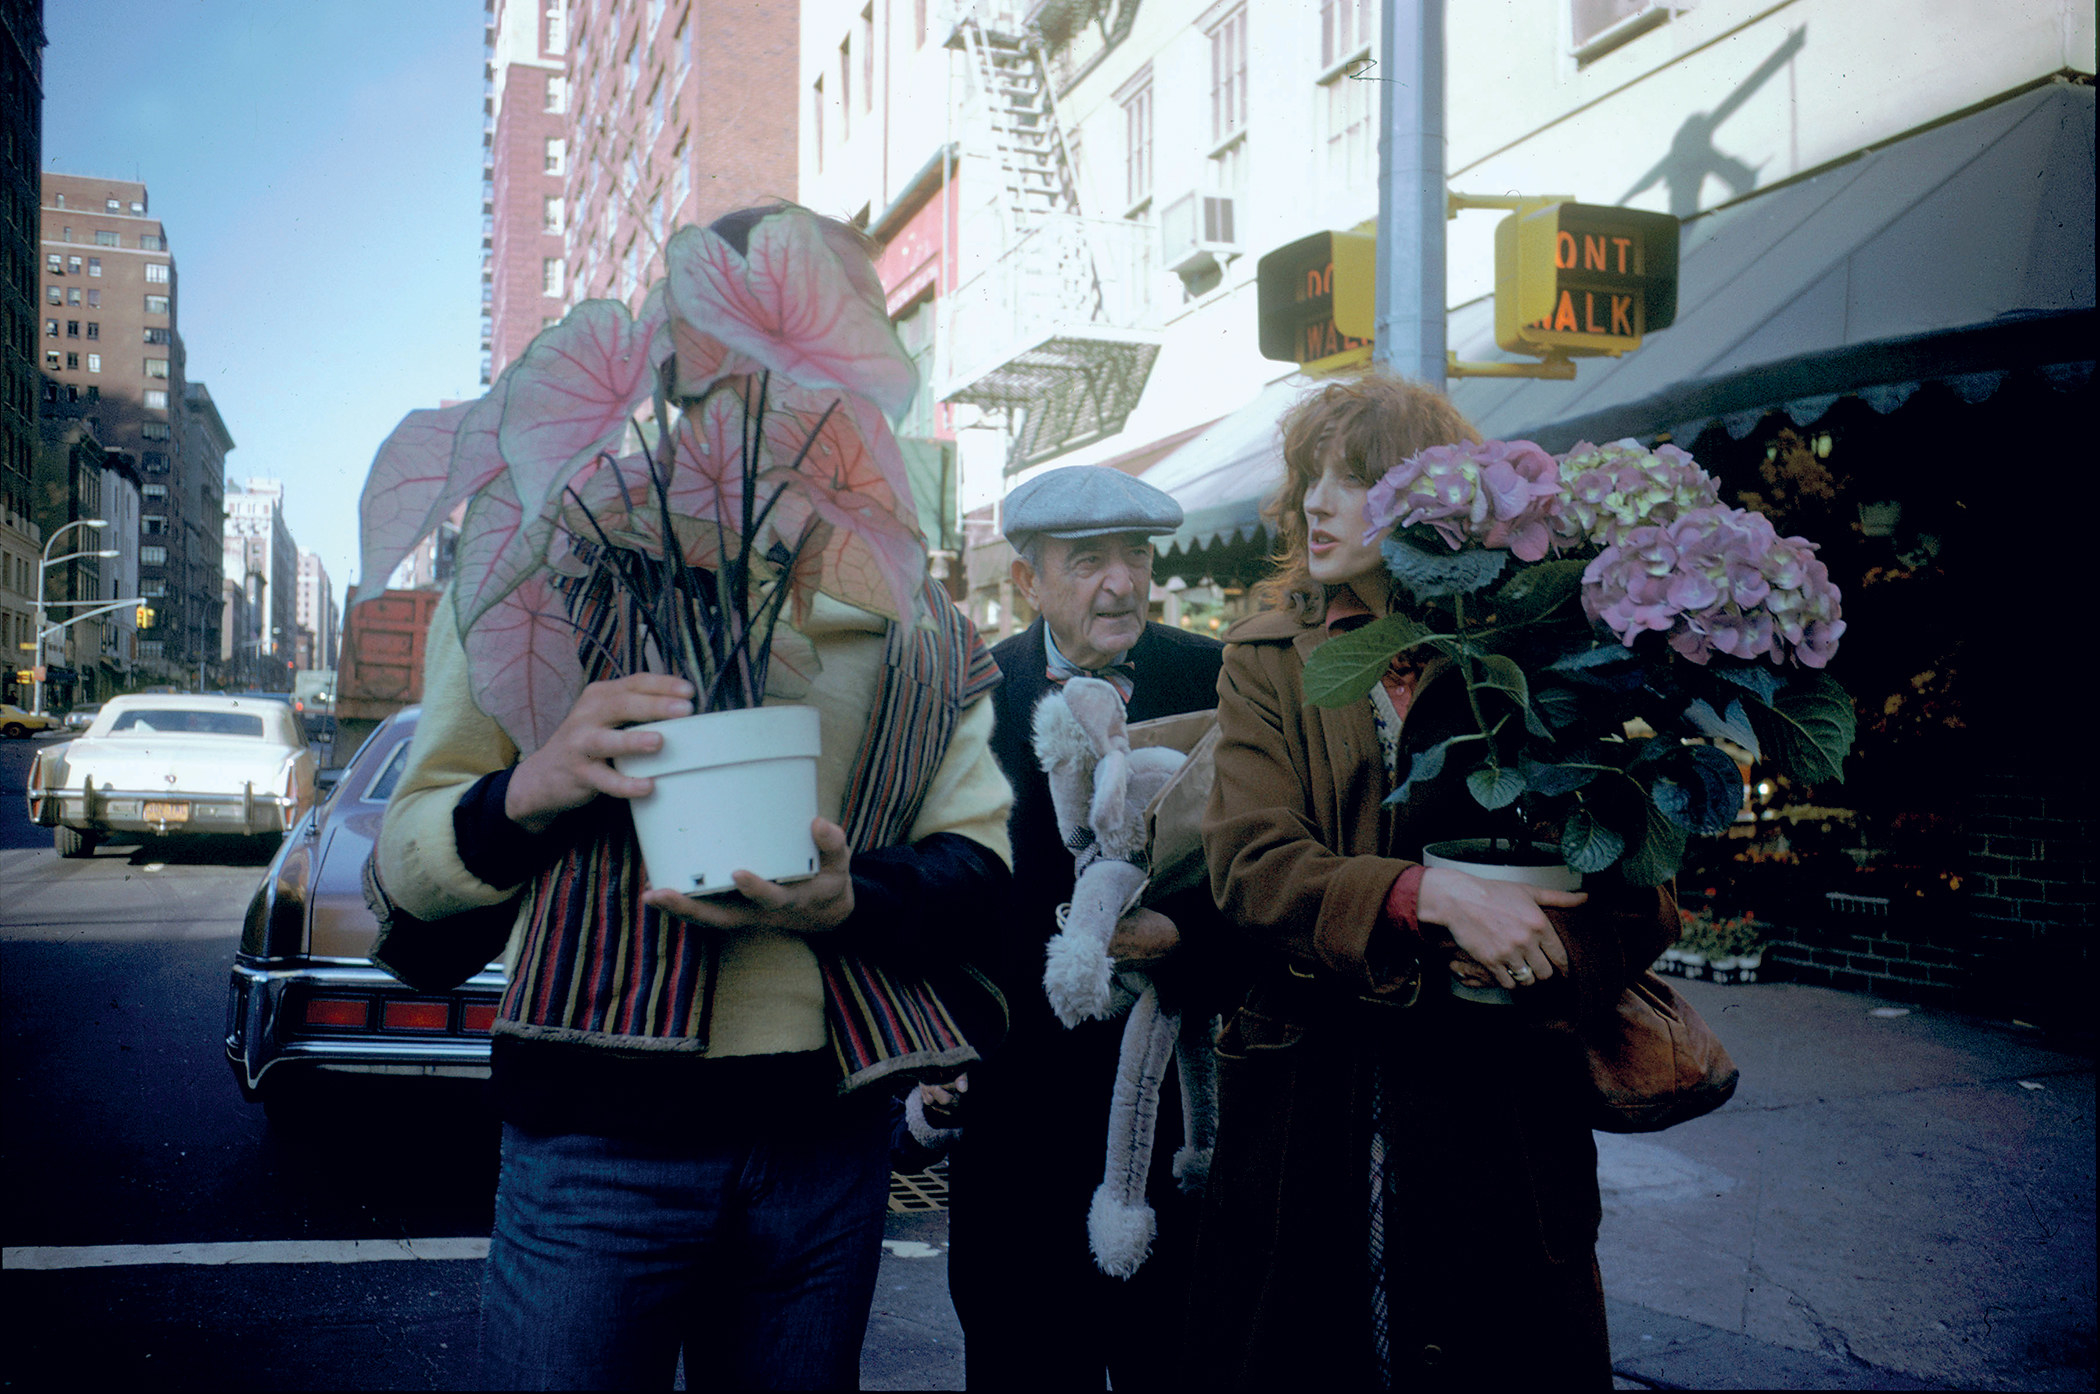 A man and a woman carry flowers on a city street